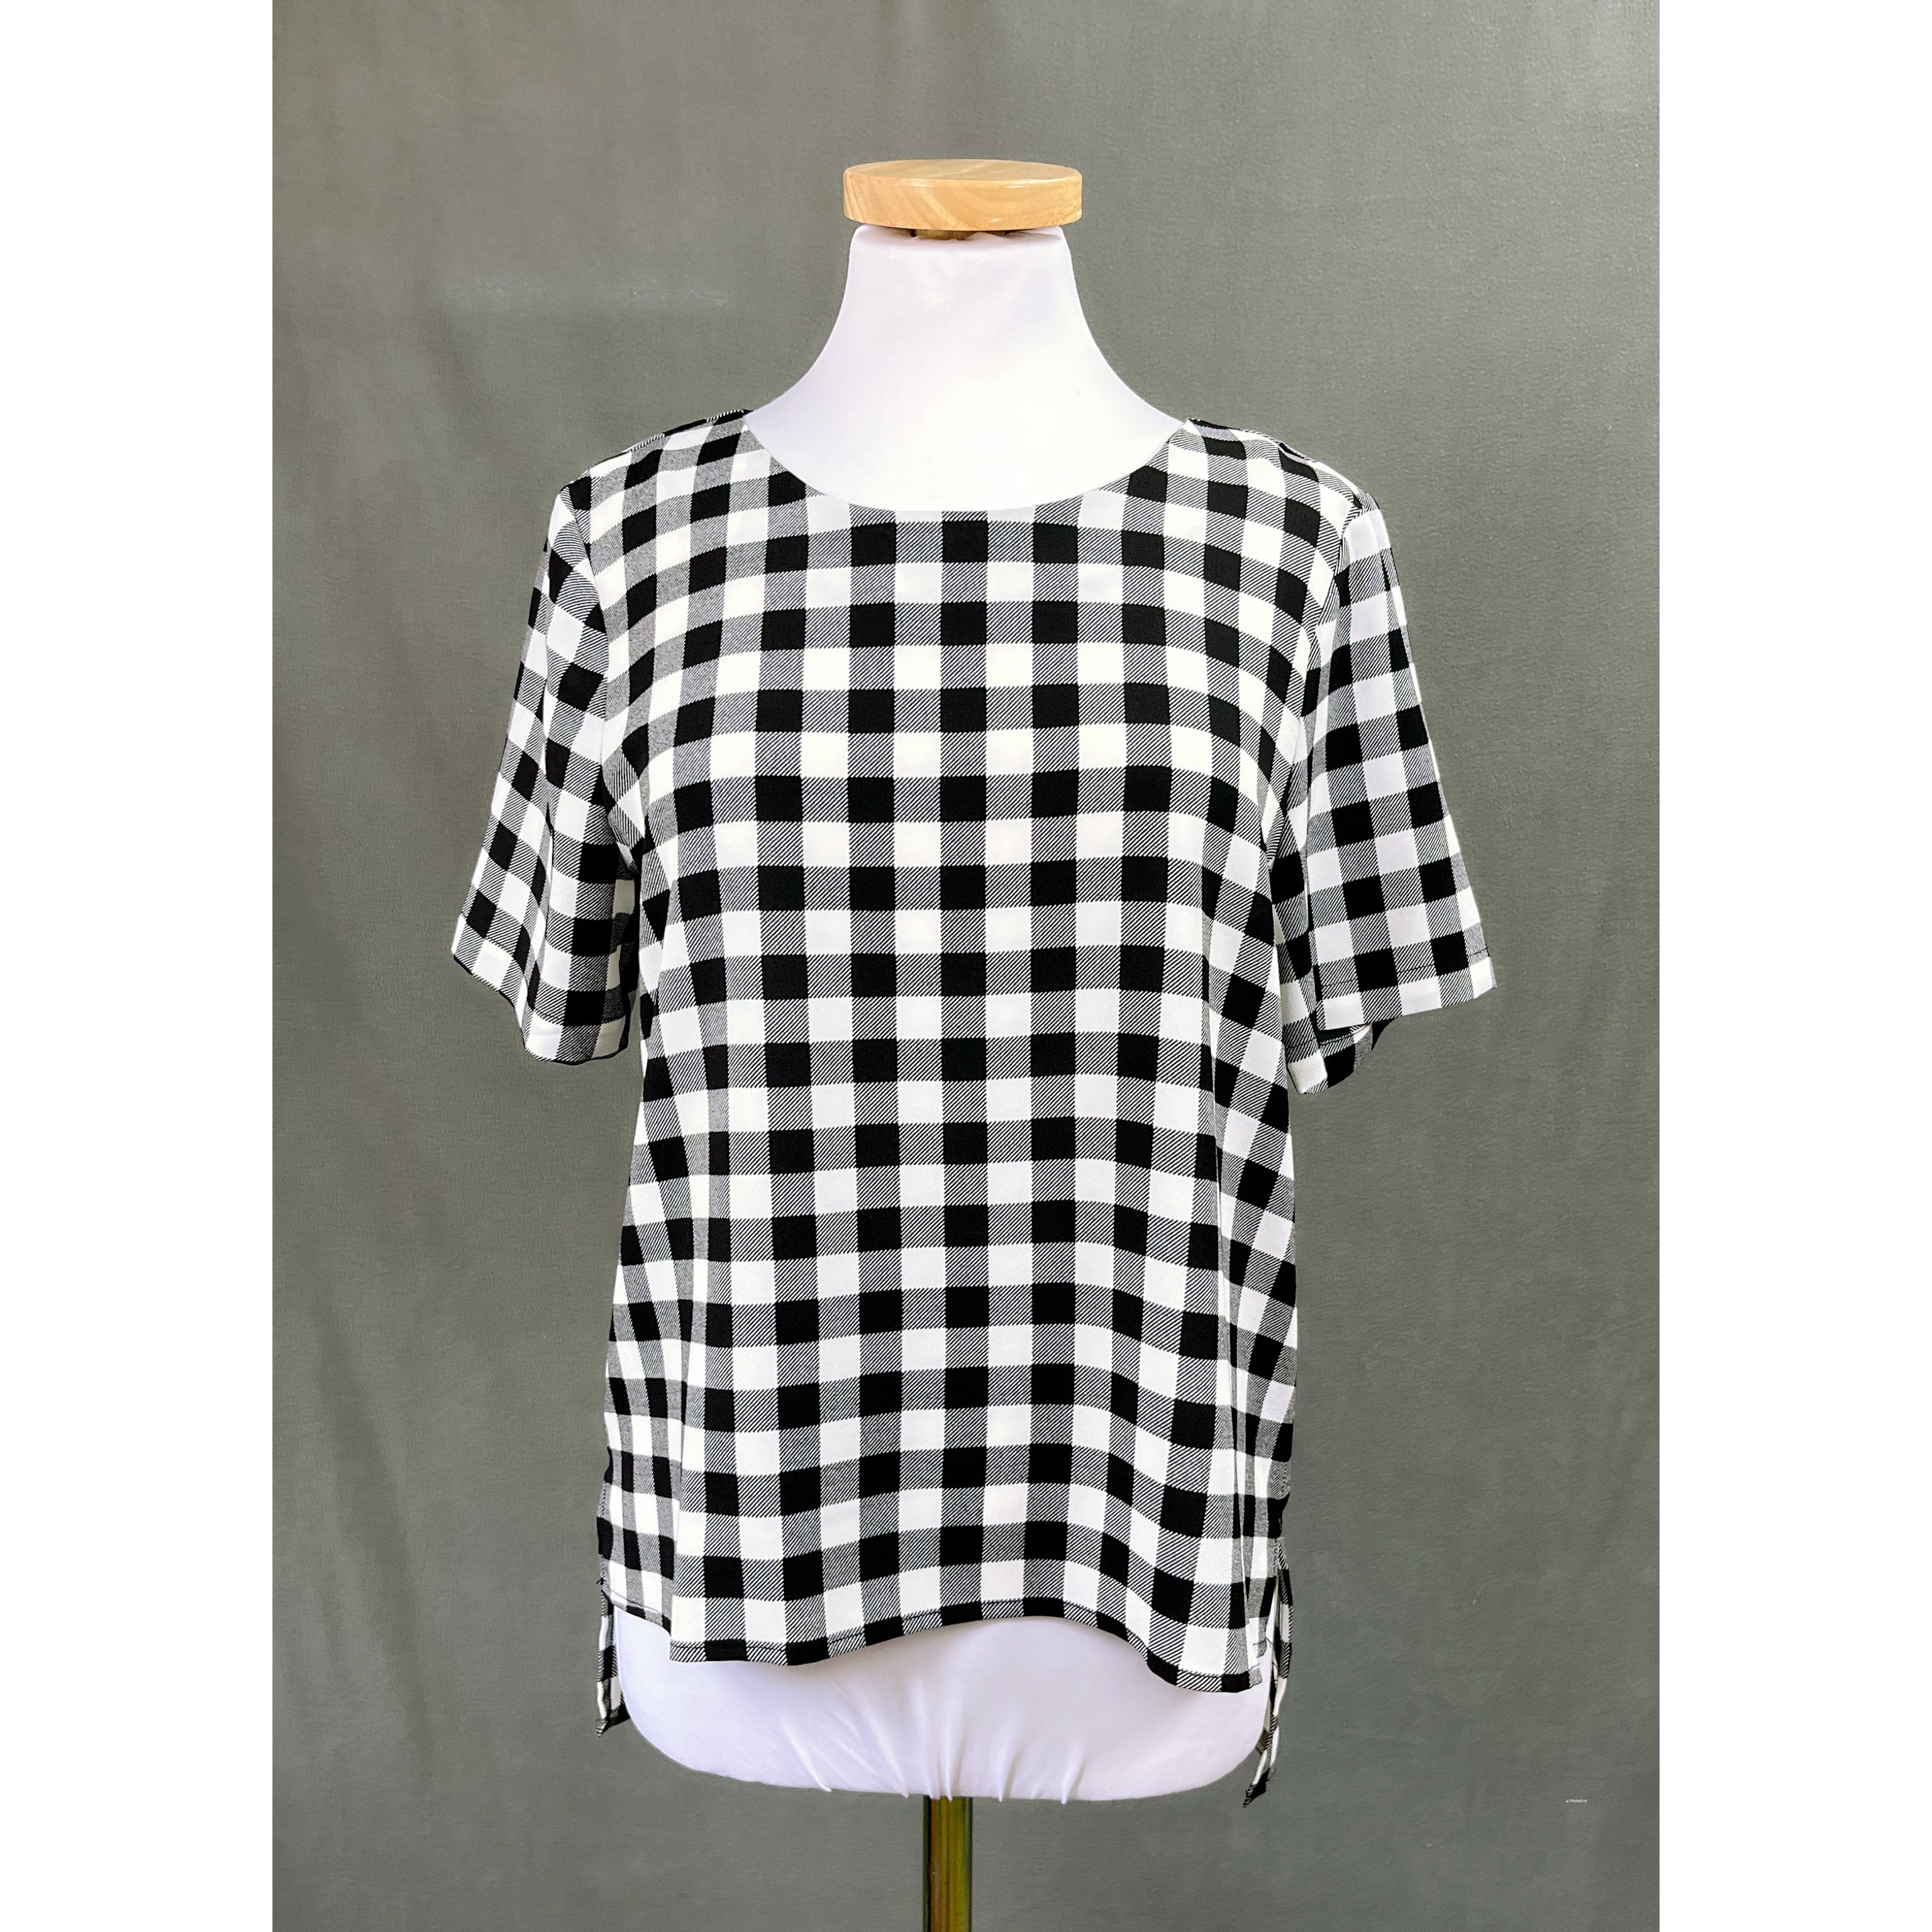 Sanctuary black & white check blouse, size S, NEW WITH TAGS!